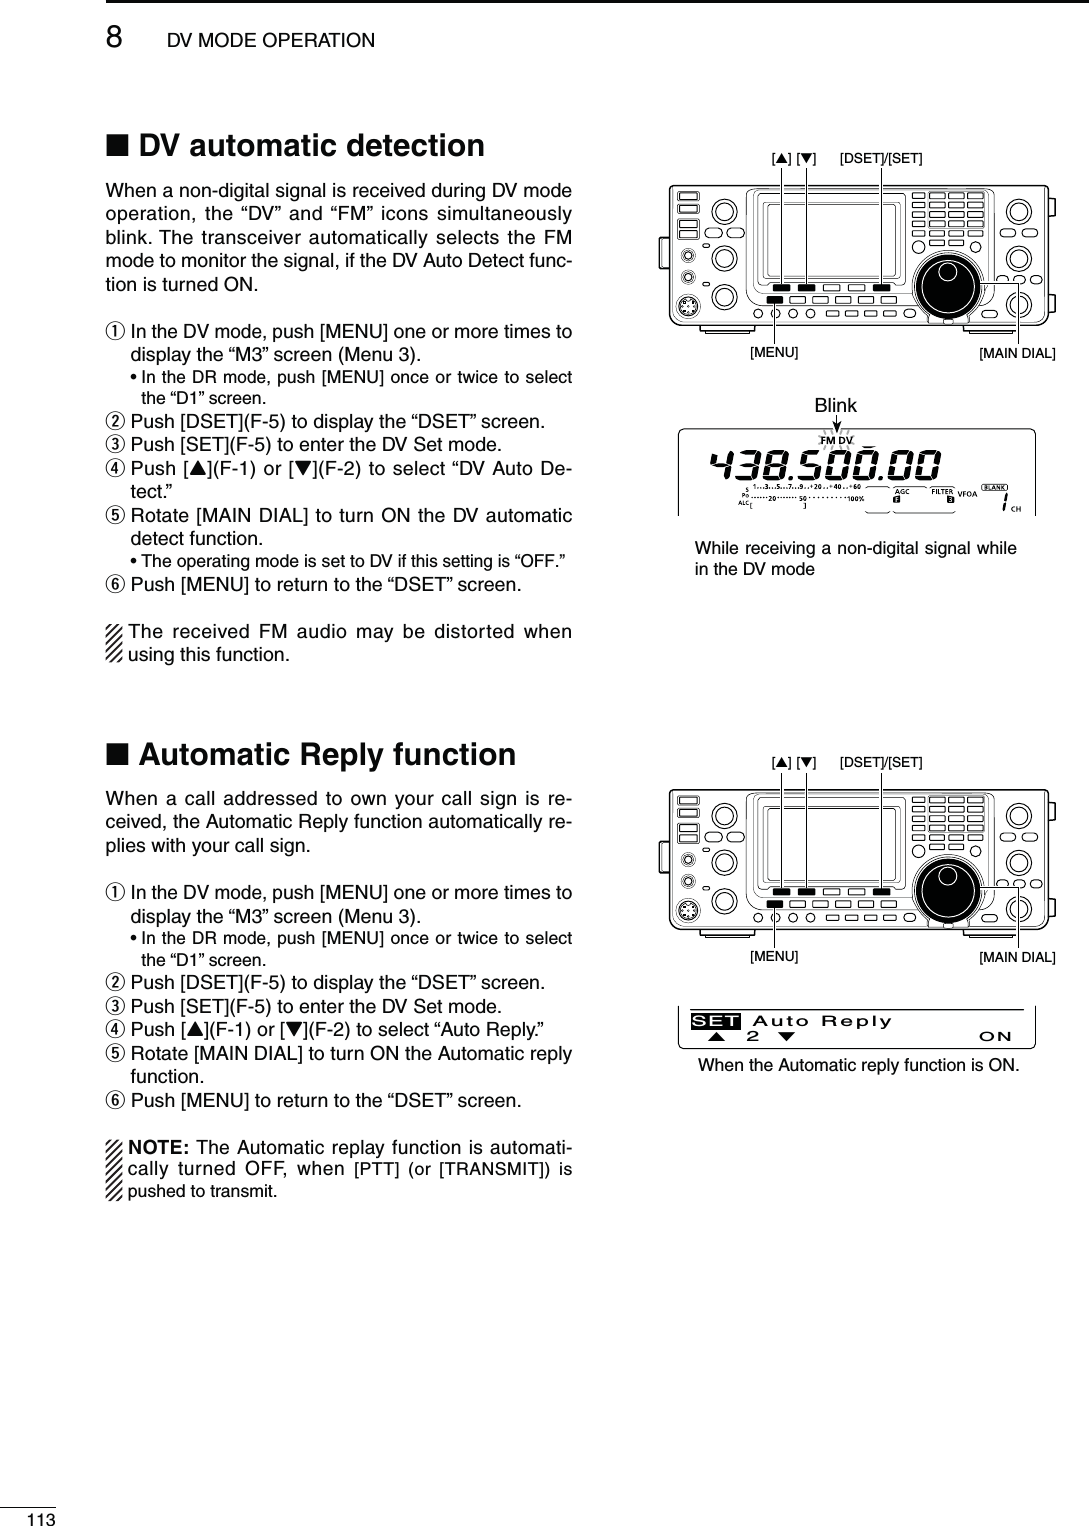 1138DV MODE OPERATIONN $6AUTOMATICDETECTIONWhen a non-digital signal is received during DV mode operation, the “DV” and “FM” icons simultaneously blink. The transceiver automatically selects the FM mode to monitor the signal, if the DV Auto Detect func-tion is turned ON.q  In the DV mode, push [MENU] one or more times to display the “M3” screen (Menu 3). s)NTHE$2MODEPush [MENU] once or twice to select the “D1” screen.w  Push [DSET](F-5) to display the “DSET” screen.e  Push [SET](F-5) to enter the DV Set mode.r  Push [Y](F-1) or [Z](F-2) to select “DV Auto De-tect.”t  Rotate [MAIN DIAL] to turn ON the DV automatic detect function. sThe operating mode is set to DV if this setting is “OFF.”y  Push [MENU] to return to the “DSET” screen.The received FM audio may be distorted when using this function.[MAIN DIAL][MENU][DSET]/[SET][][]BlinkWhile receiving a non-digital signal while in the DV modeN!UTOMATIC2EPLYFUNCTIONWhen a call addressed to own your call sign is re-ceived, the Automatic Reply function automatically re-plies with your call sign.q  In the DV mode, push [MENU] one or more times to display the “M3” screen (Menu 3). s)NTHE$2MODEPush [MENU] once or twice to select the “D1” screen.w Push [DSET](F-5) to display the “DSET” screen.e Push [SET](F-5) to enter the DV Set mode.r Push [Y](F-1) or [Z](F-2) to select “Auto Reply.”t  Rotate [MAIN DIAL] to turn ON the Automatic reply function.y Push [MENU] to return to the “DSET” screen.NOTE: The Automatic replay function is automati-cally turned OFF, when [PTT] (or [TRANSMIT]) is pushed to transmit.Ù2ÚONSET Auto Reply[MAIN DIAL][MENU][DSET]/[SET][][]When the Automatic reply function is ON.